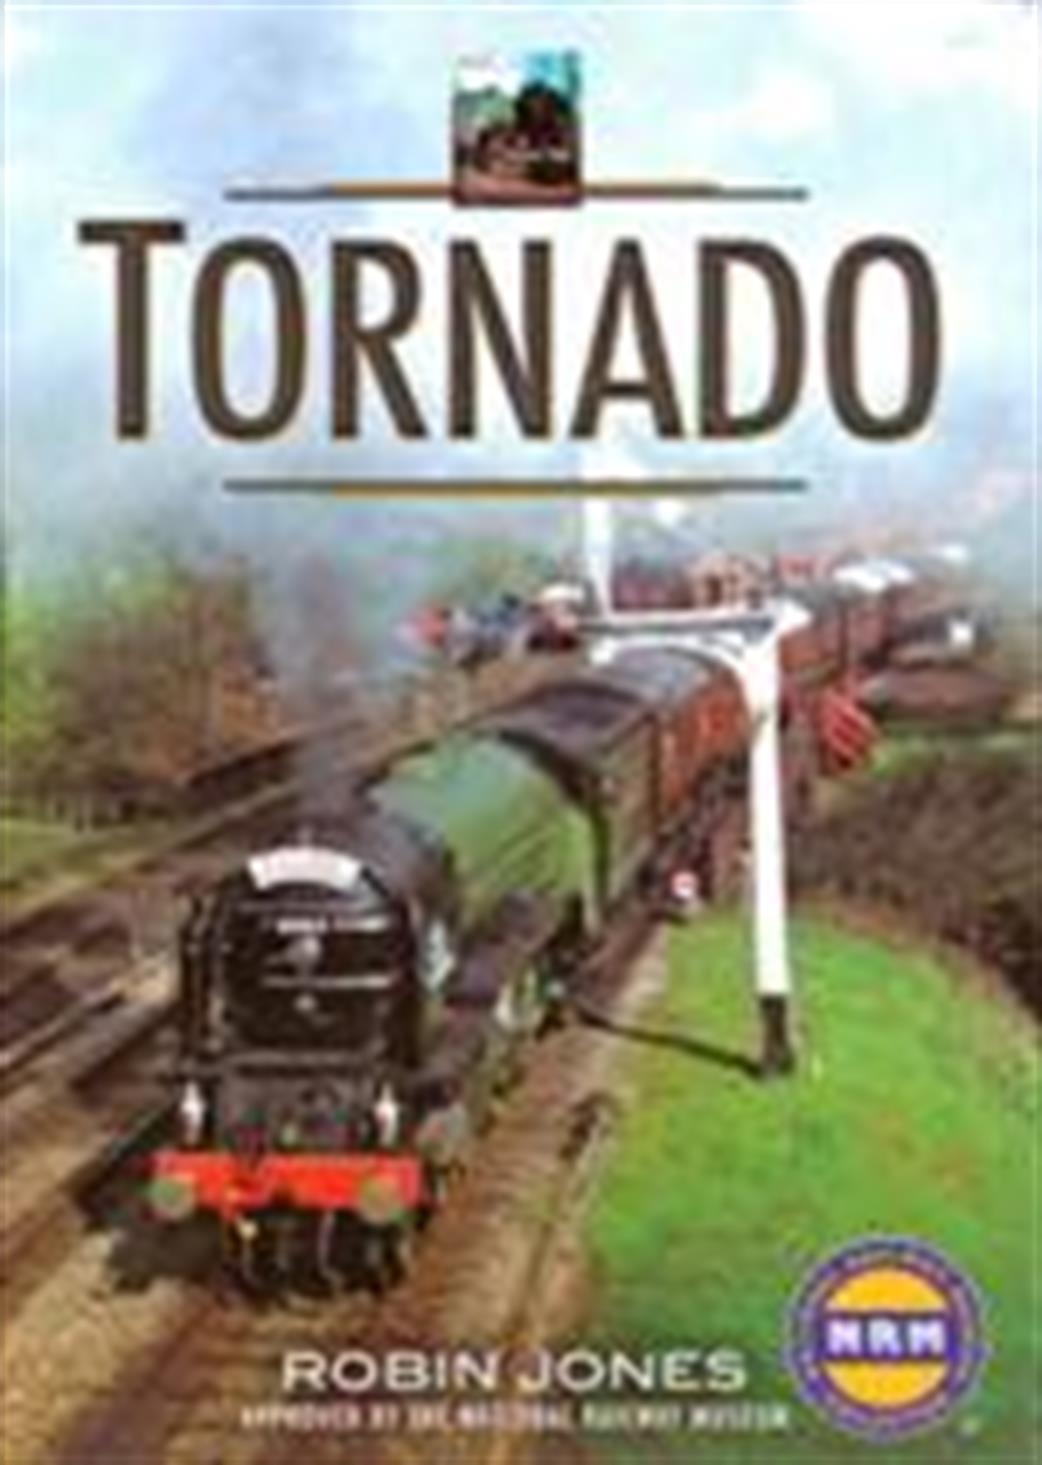 9781844681204 Tornado by Robin Jones Published by Wharncliffe Transport